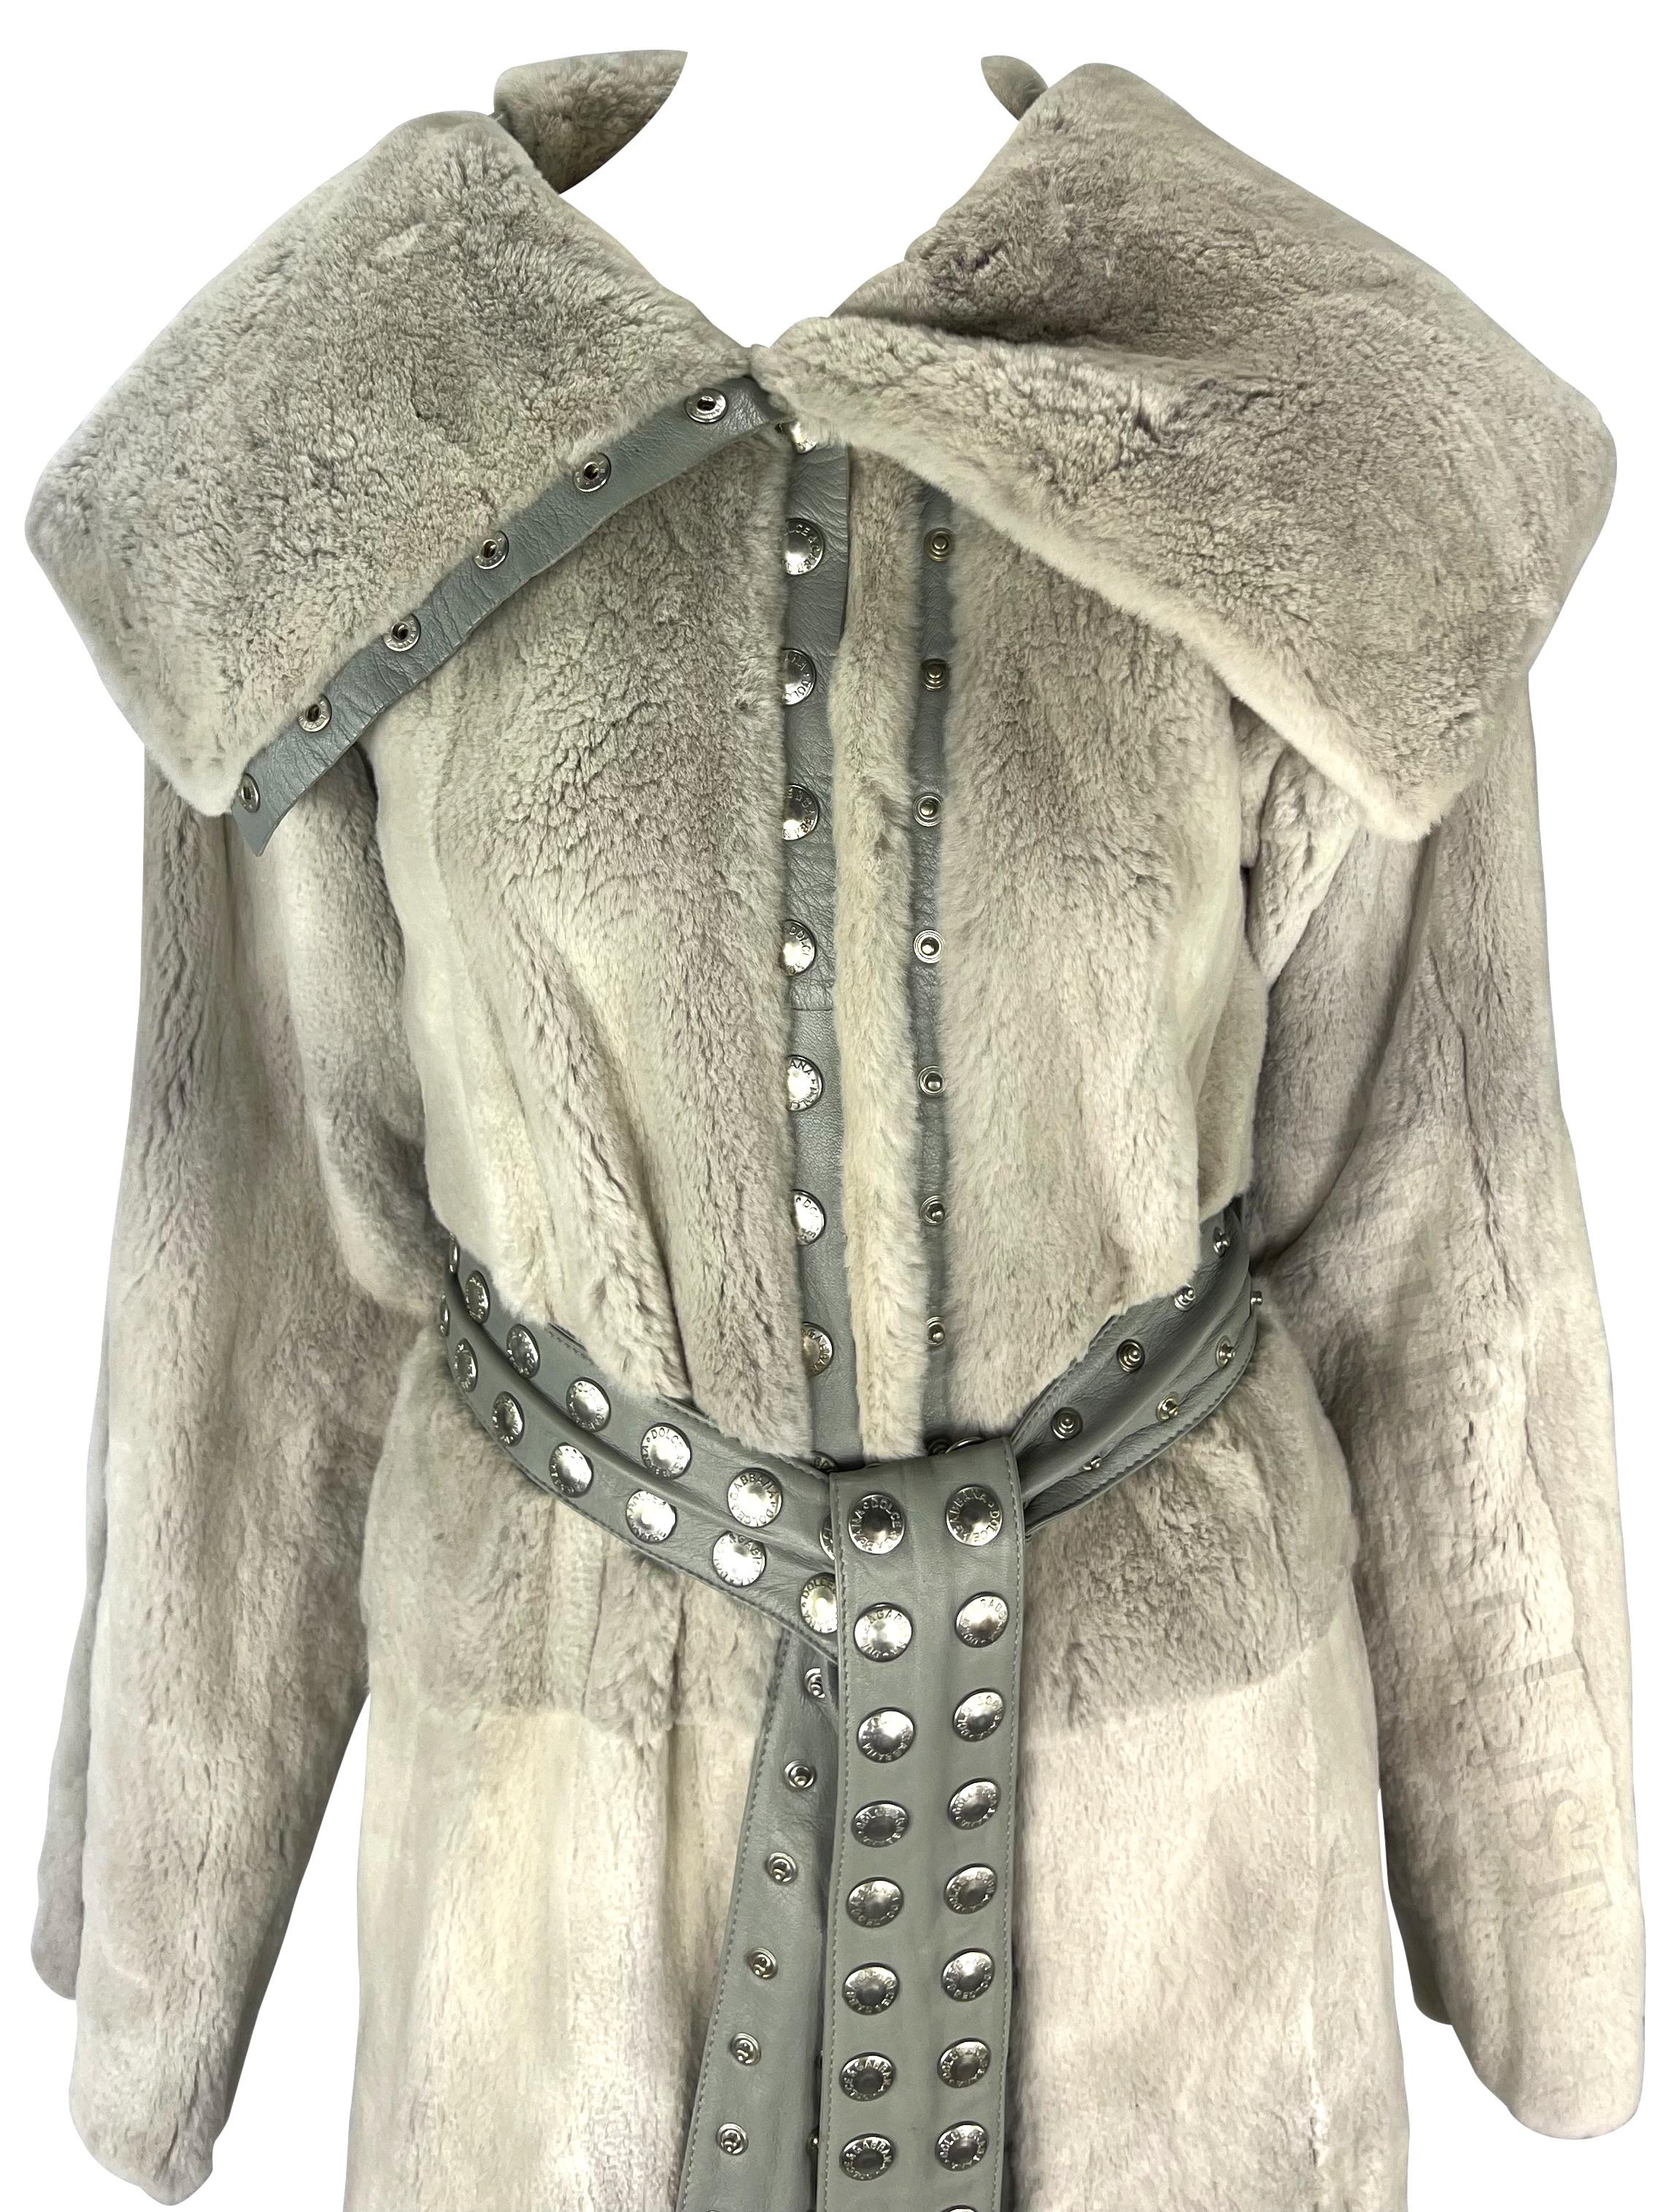 Presenting an incredible Dolce & Gabbana grey orylag fur coat. From the Fall/Winter 2003 collection, this fabulous unlined coat is constructed entirely of orylag fur with leather accents. Covered in silver-tone snaps, as many runway looks from this